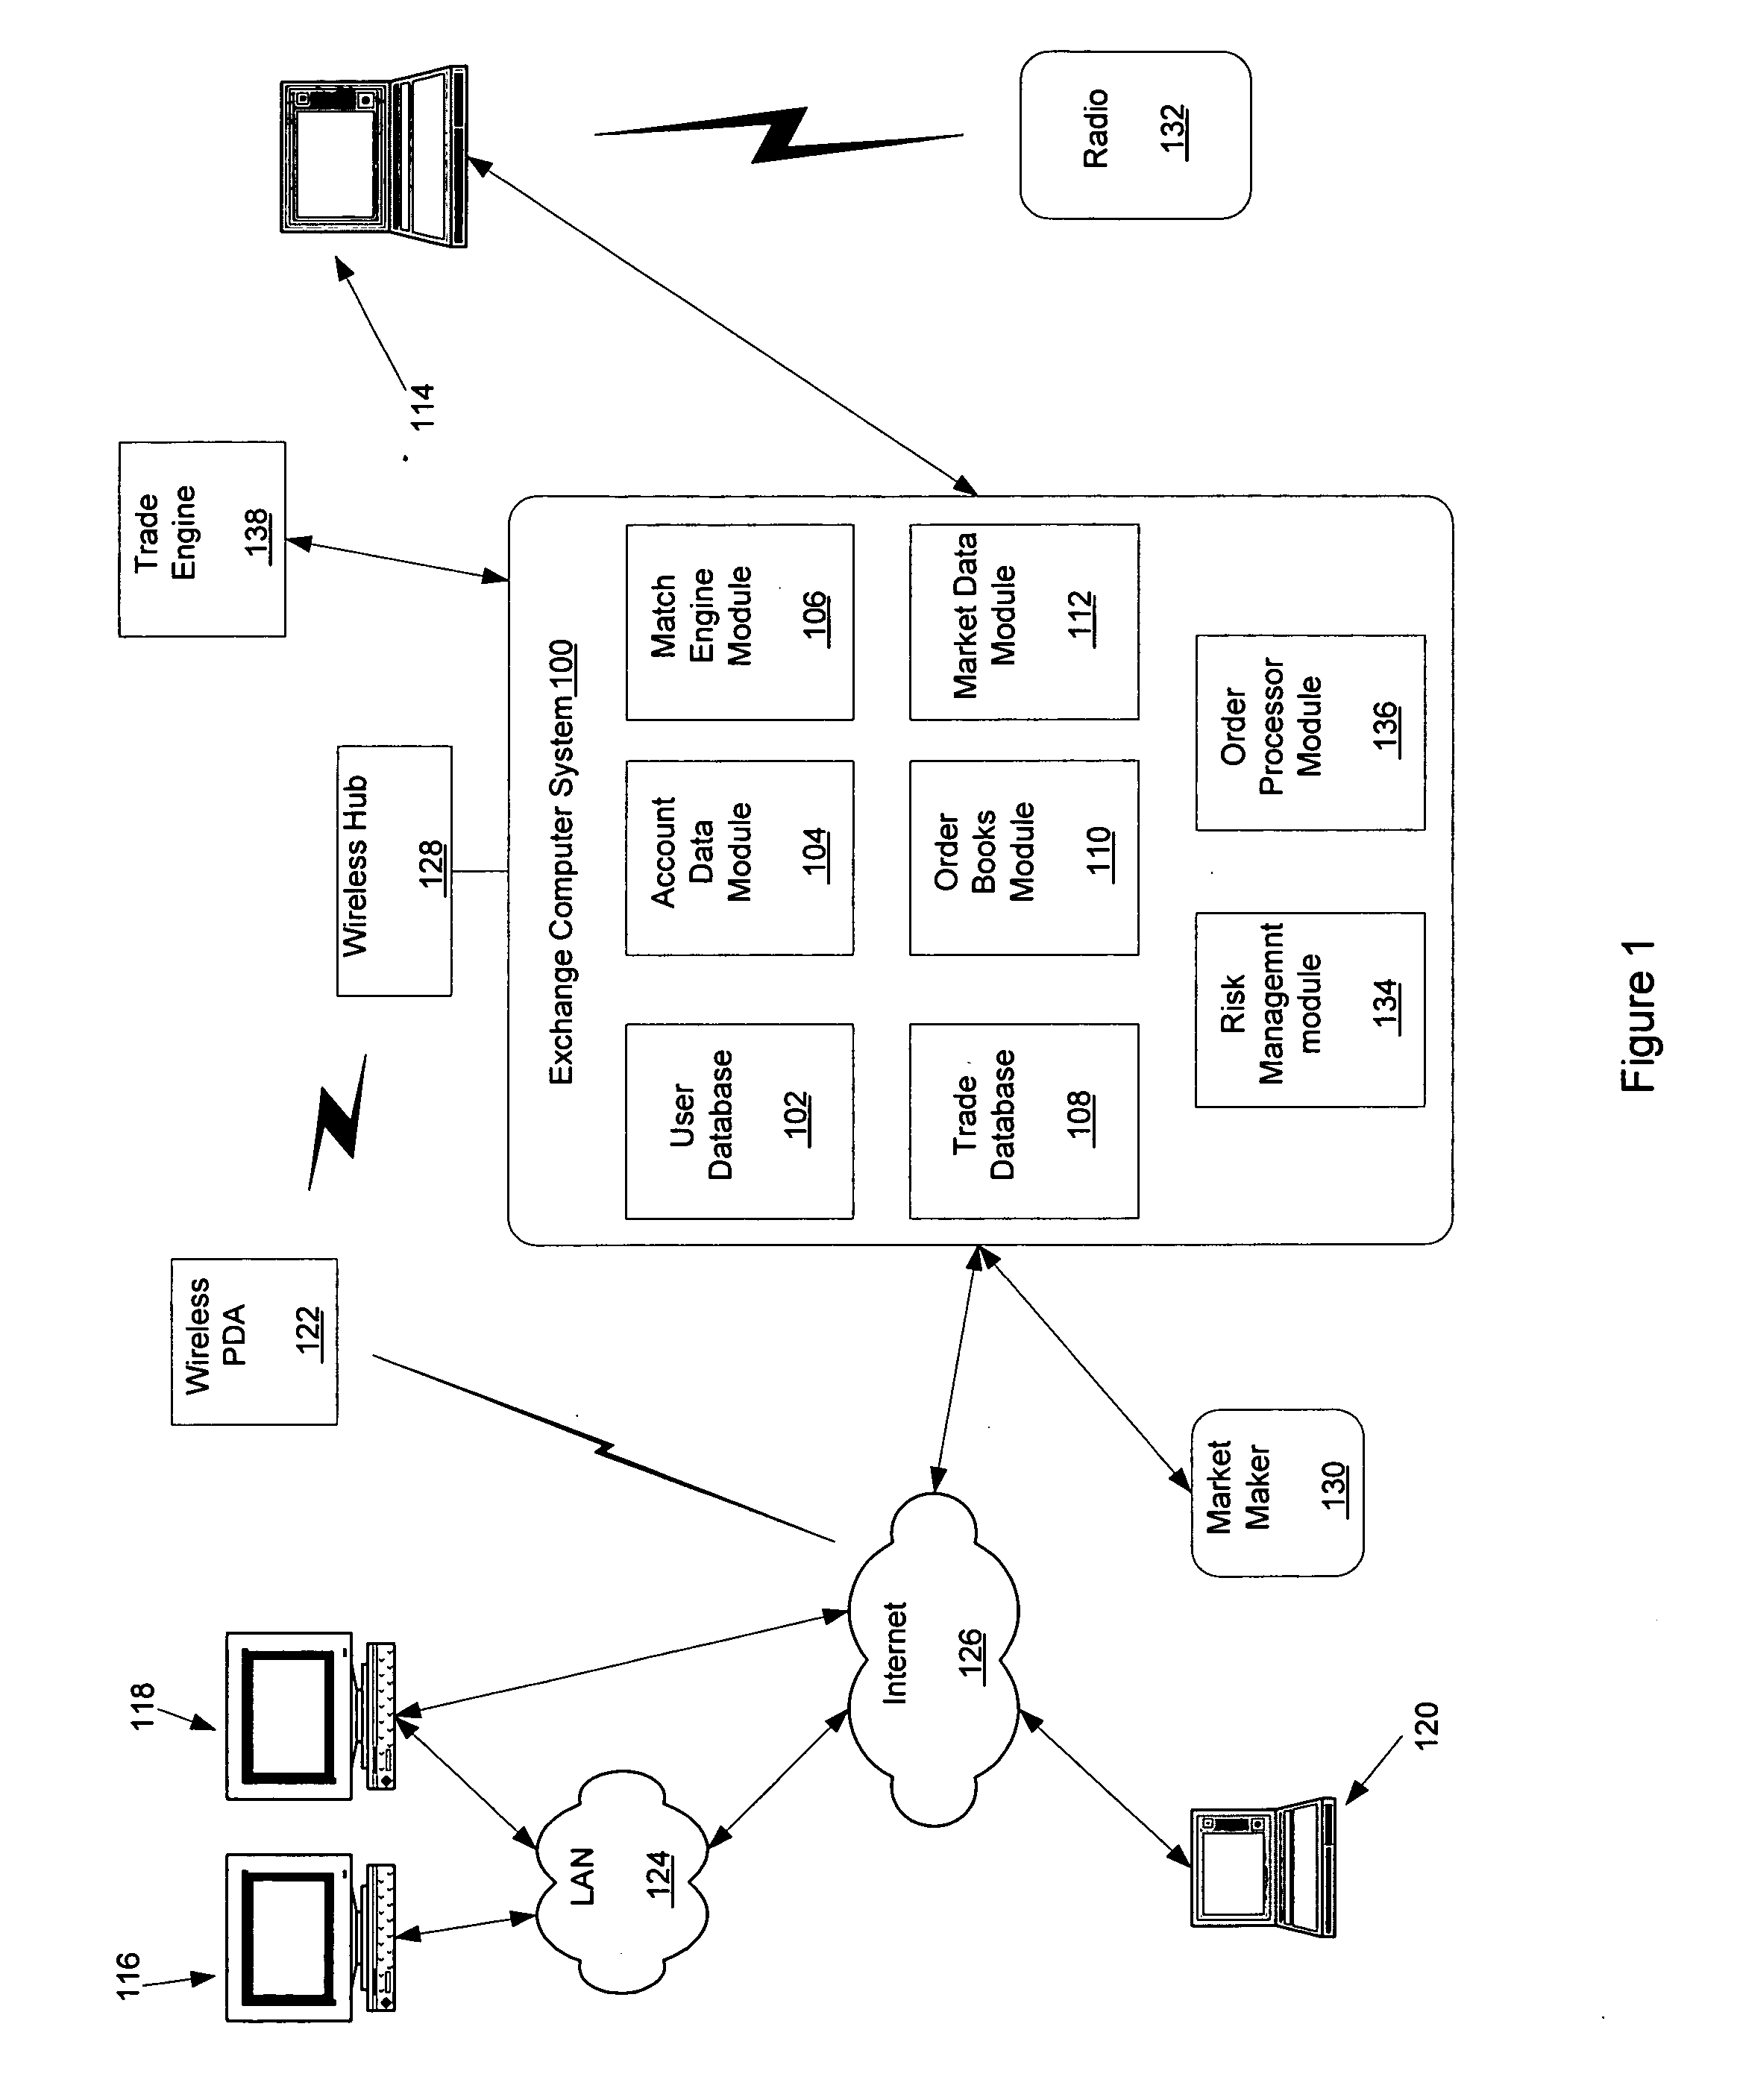 Non-indexed in-memory data storage and retrieval